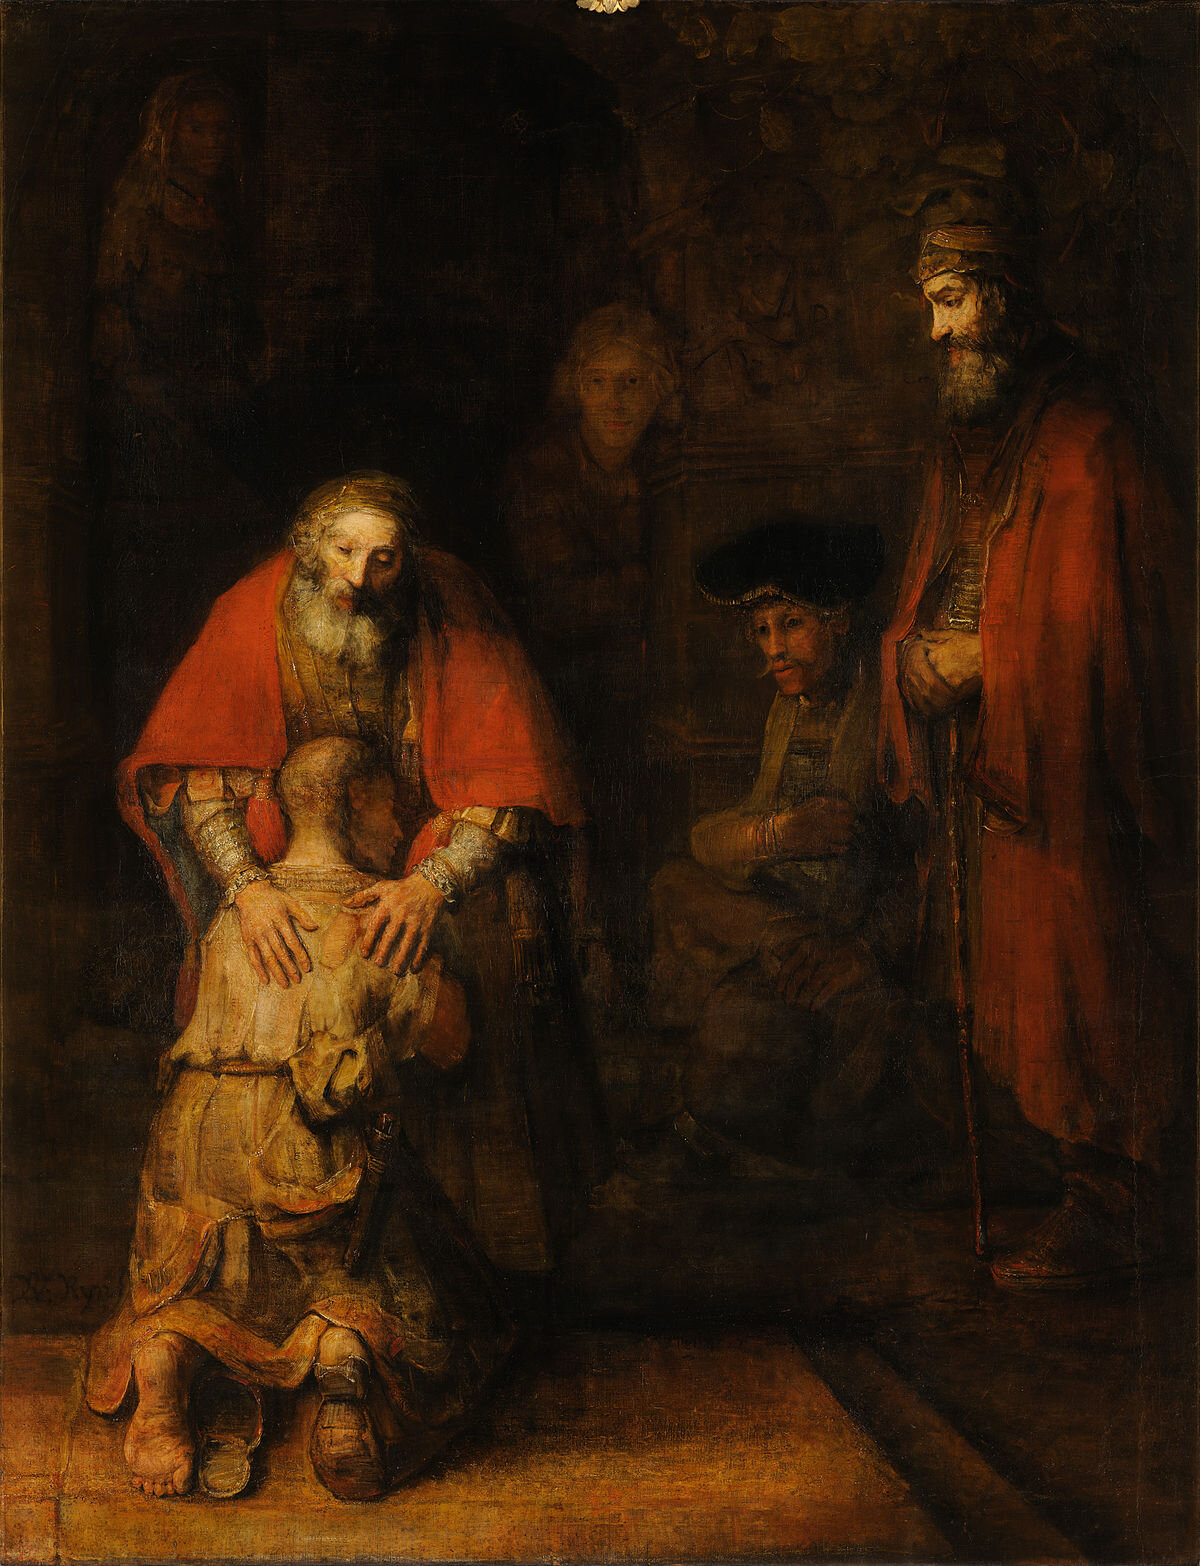 Rembrandt’s The Return of the&nbsp;Prodigal Son, c. 1661–1669